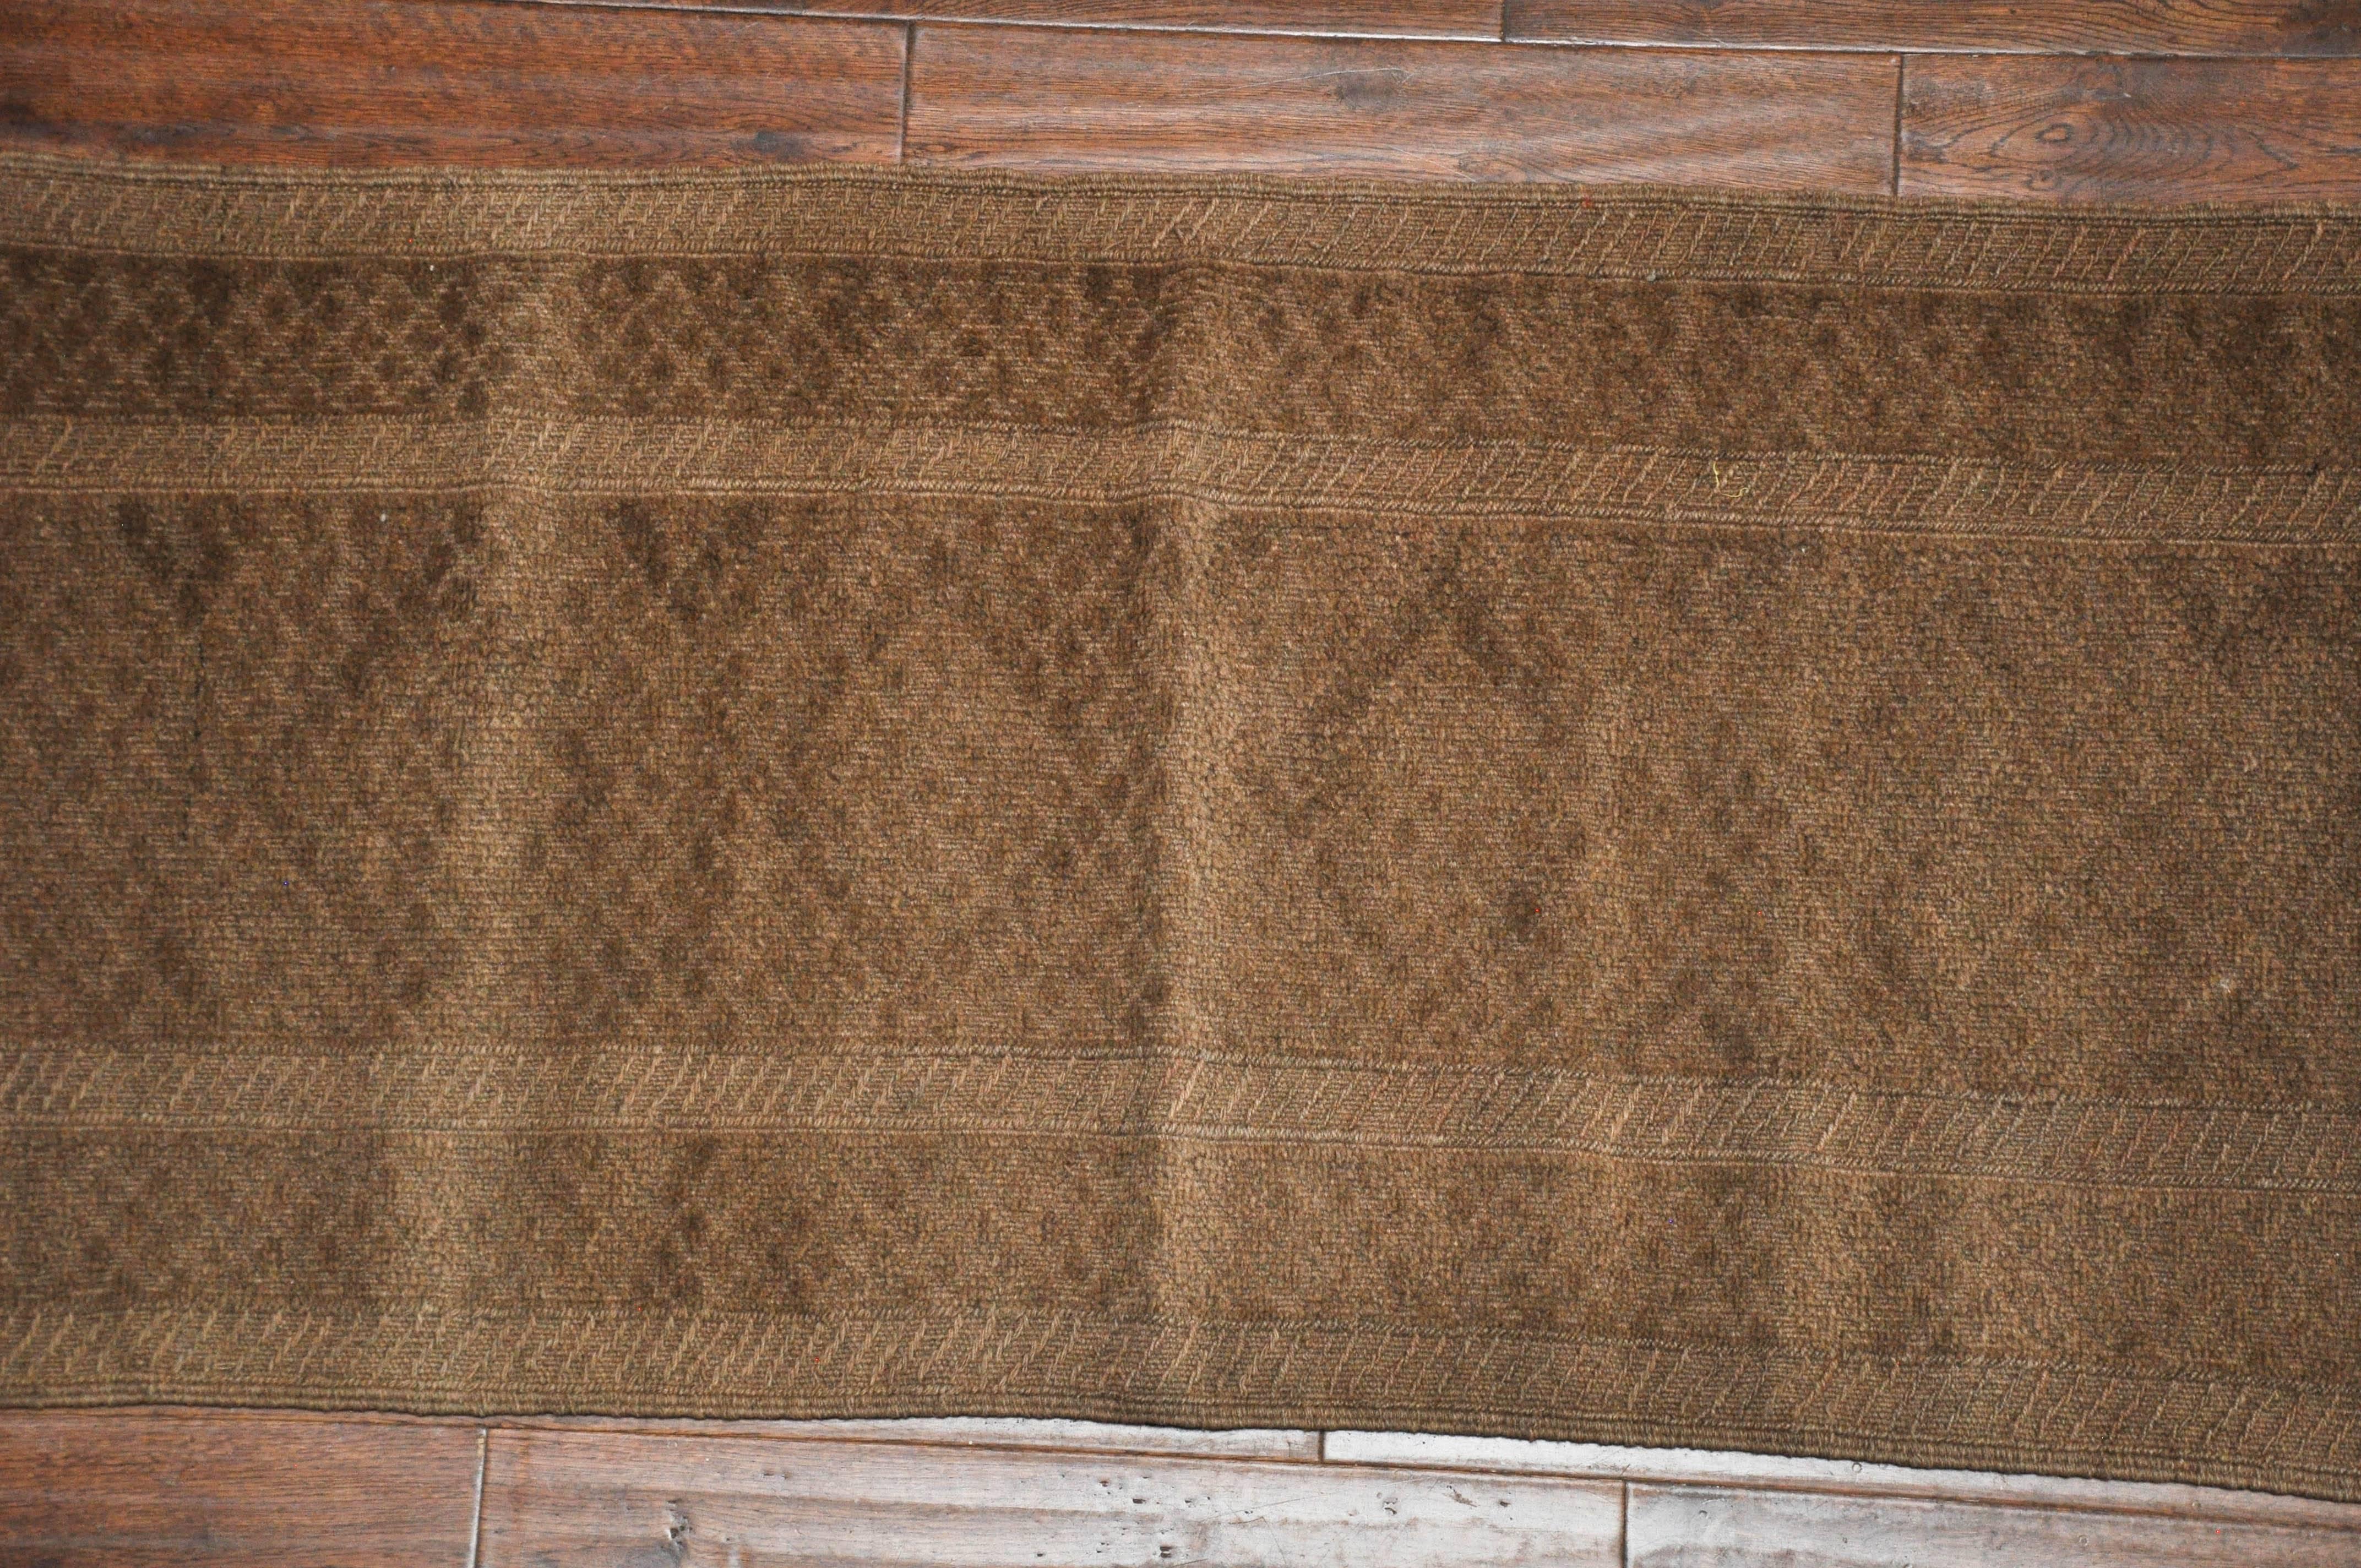 Early 20th century extra-long Turkish runner. Beautifully woven geometric pattern. Made of wool. 

Dimensions: 24